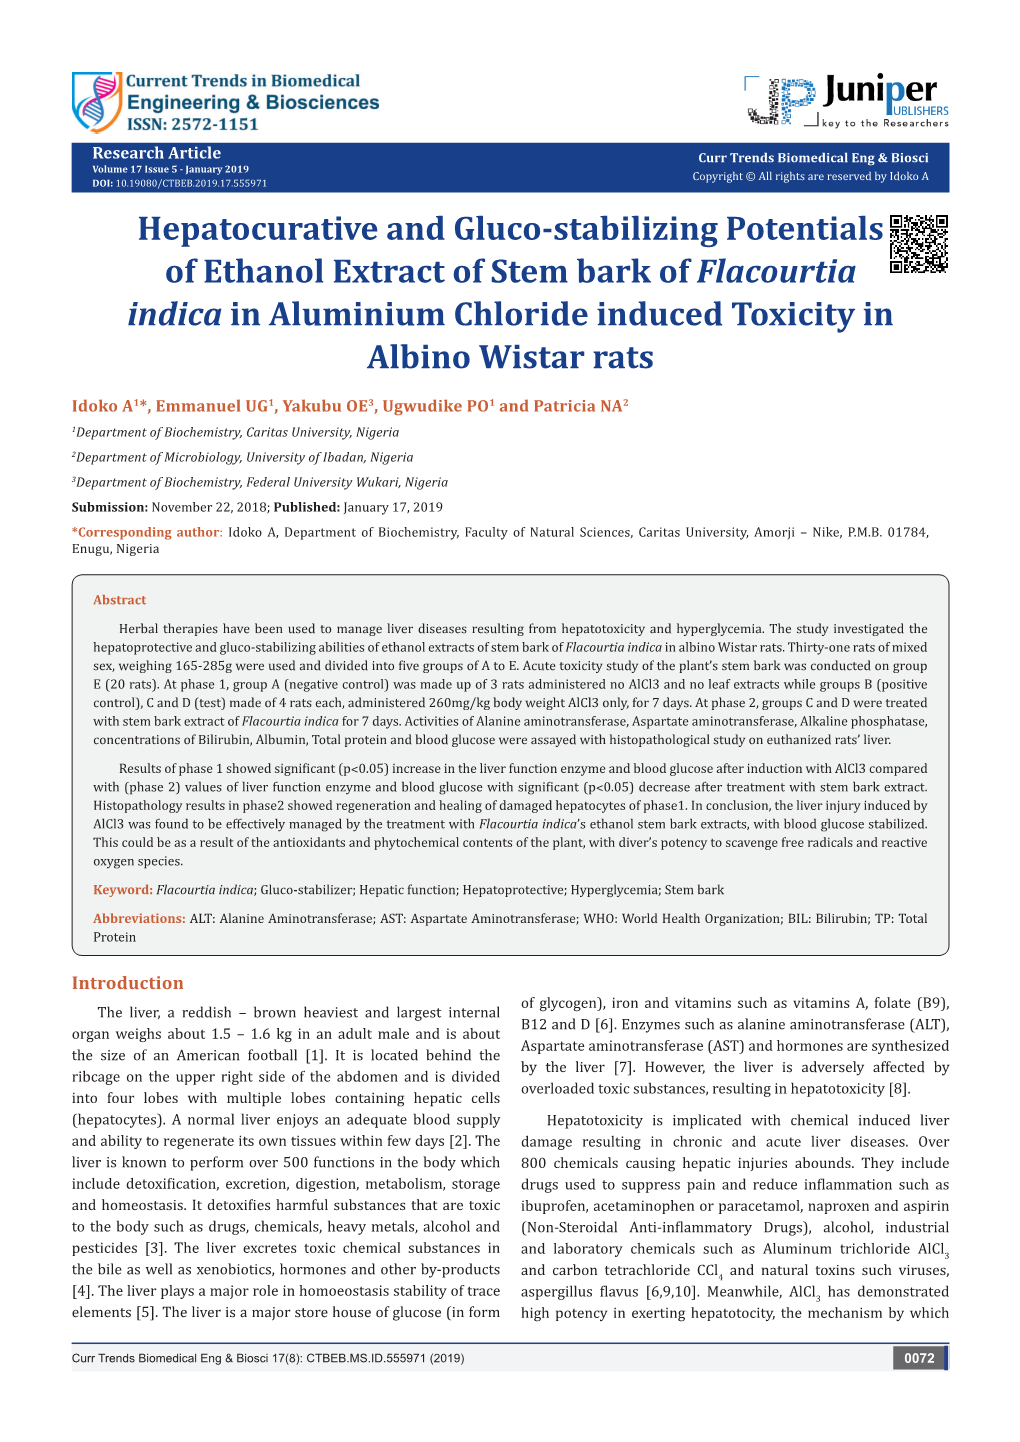 Hepatocurative and Gluco-Stabilizing Potentials of Ethanol Extract of Stem Bark of Flacourtia Indica in Aluminium Chloride Induced Toxicity in Albino Wistar Rats